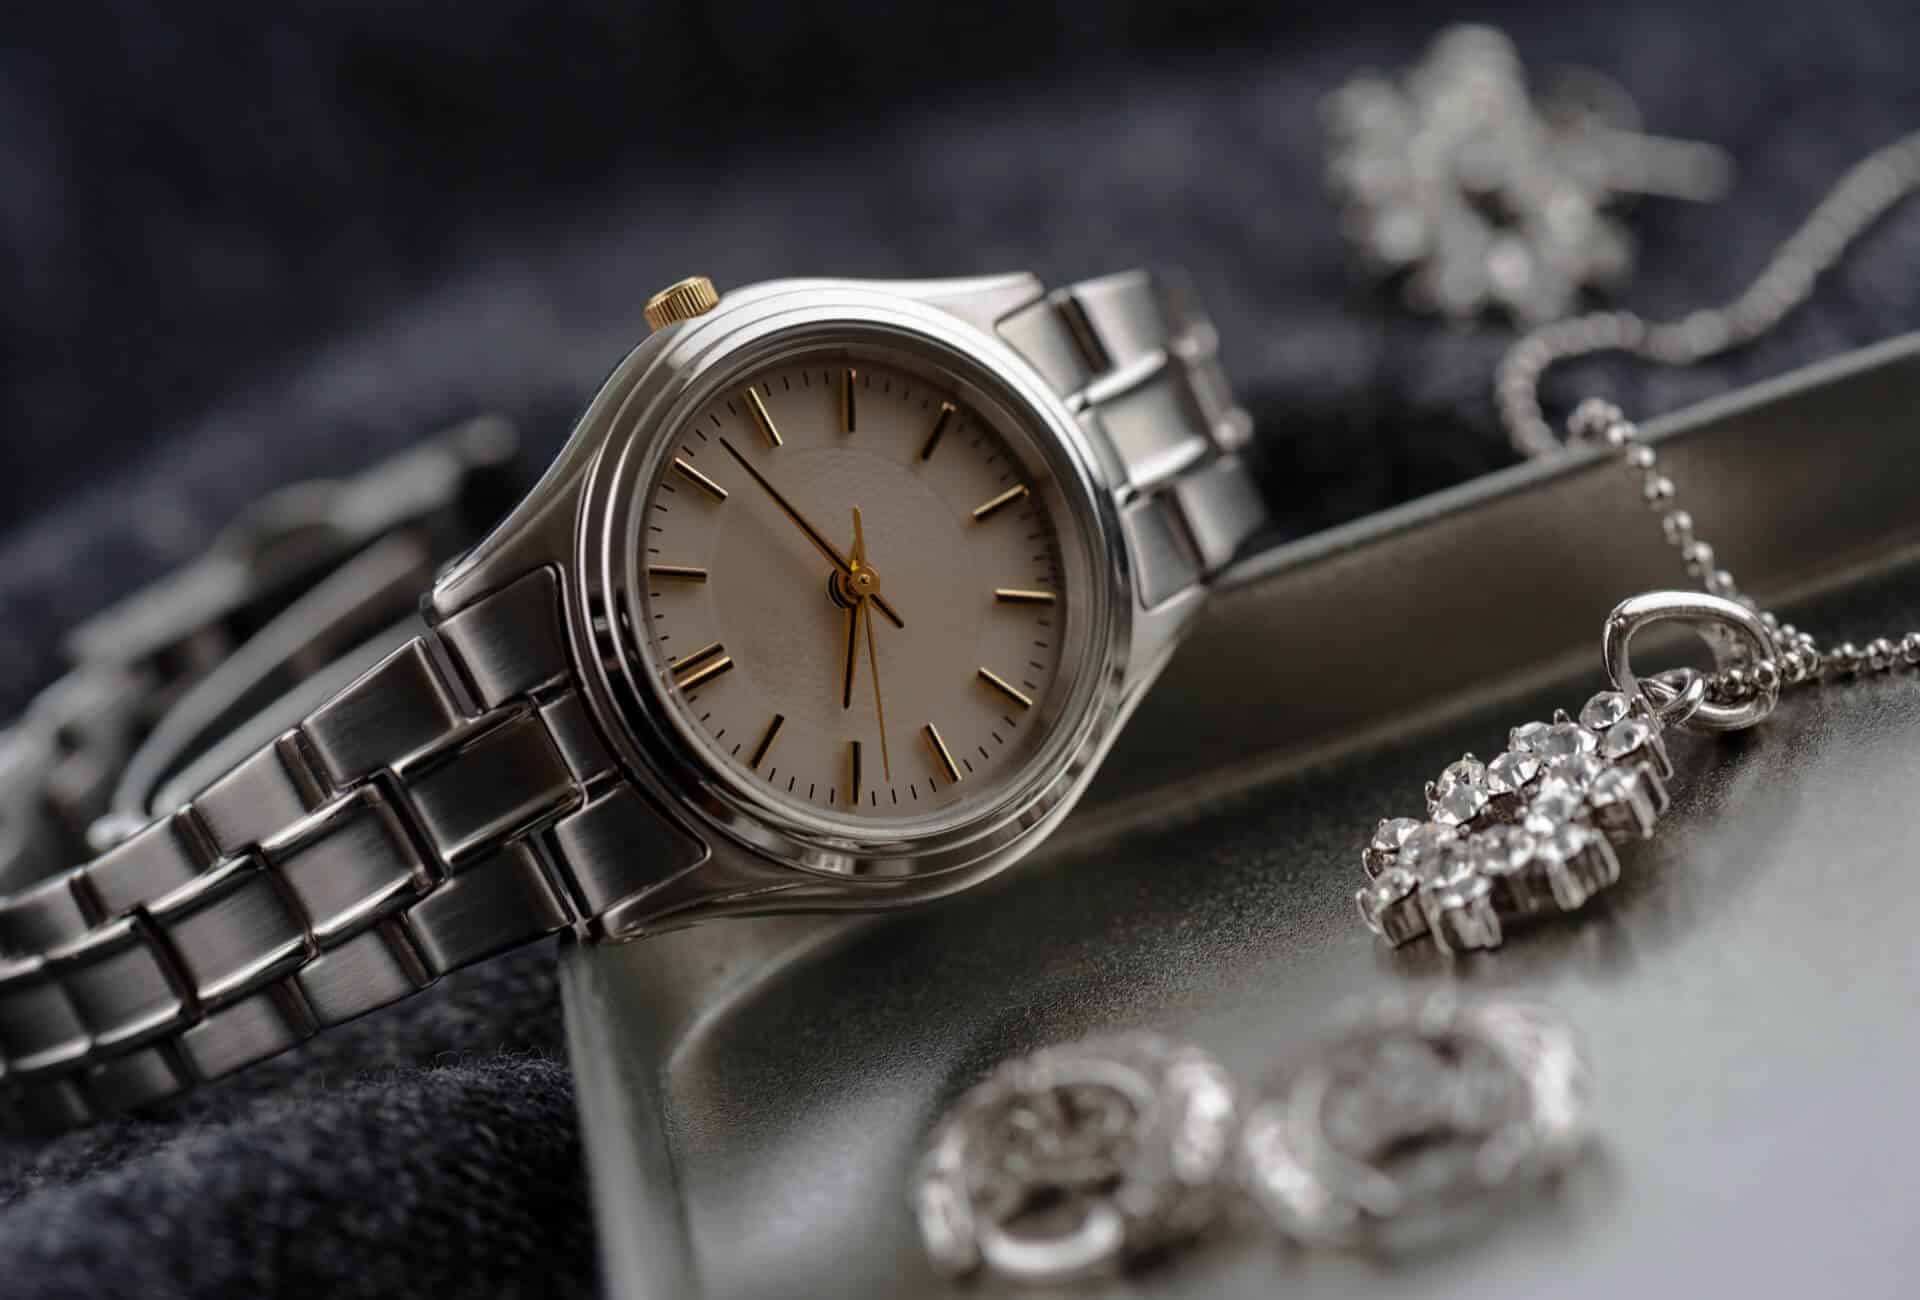 jewelry and watches images